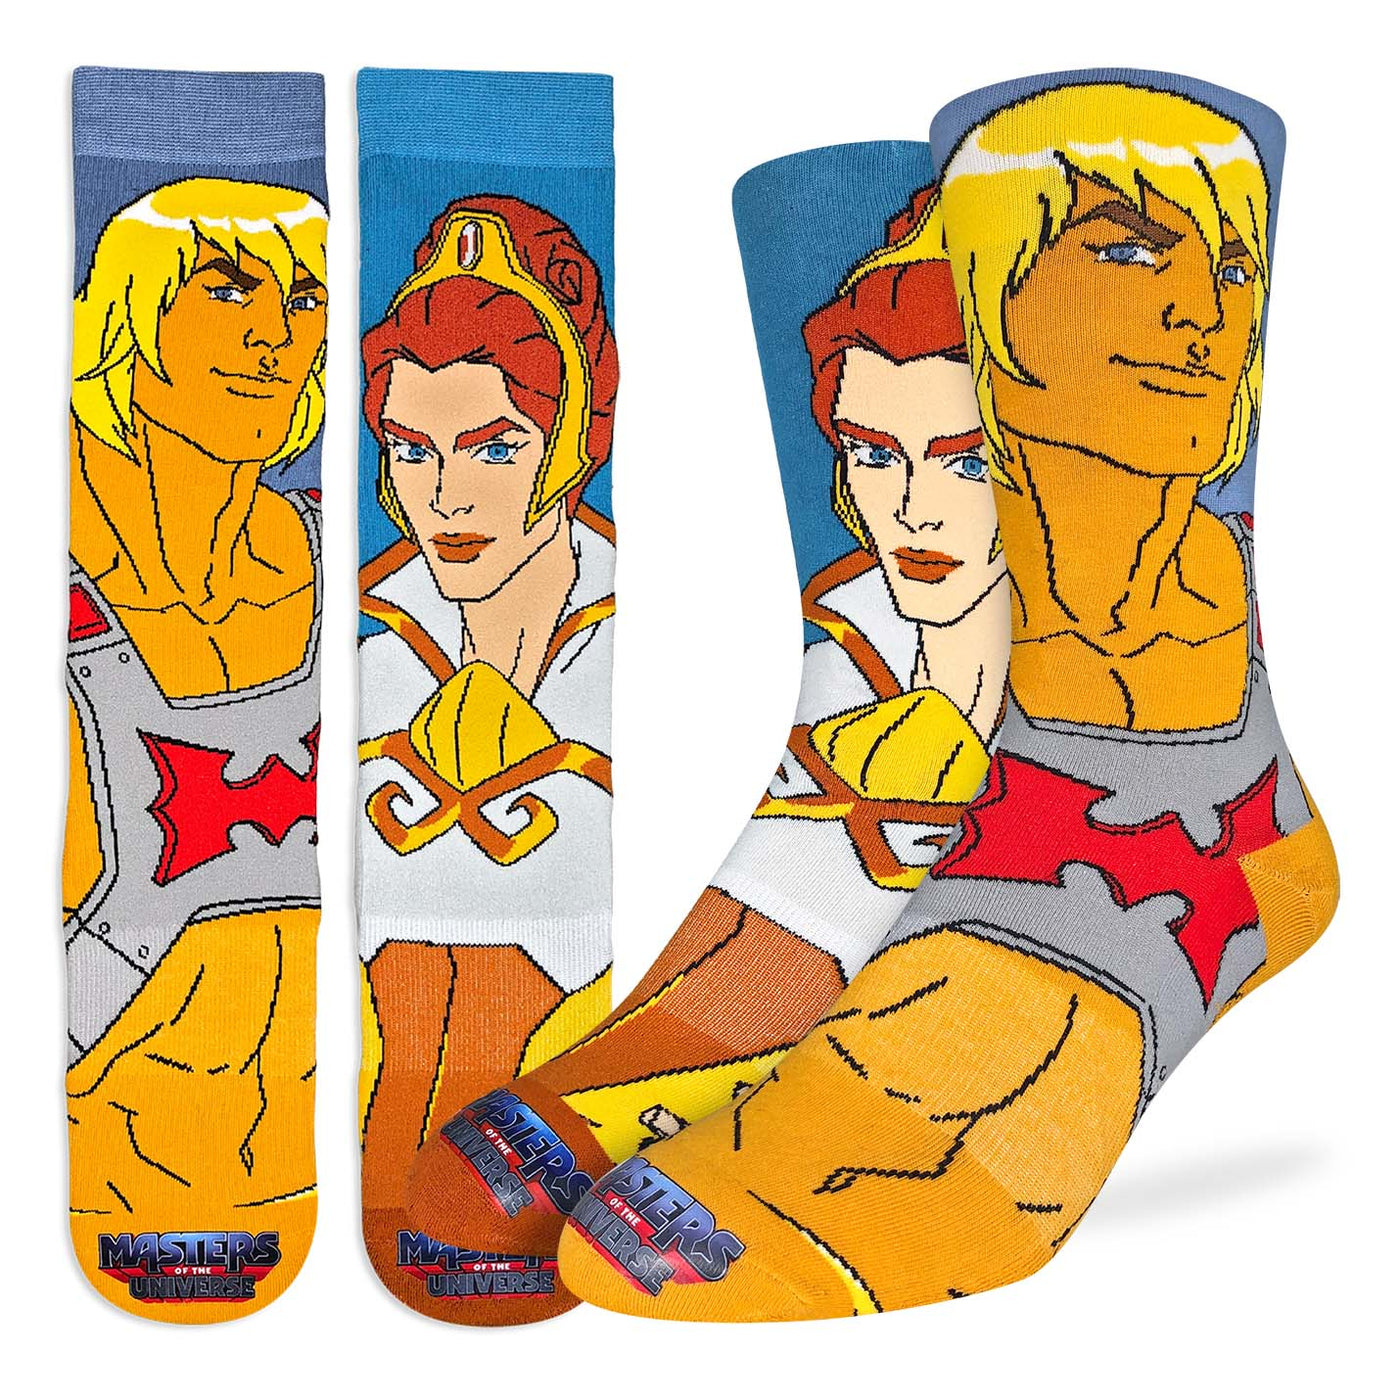 "Masters of the Universe, He-Man and Teela" Crew Socks by Good Luck Sock - Large